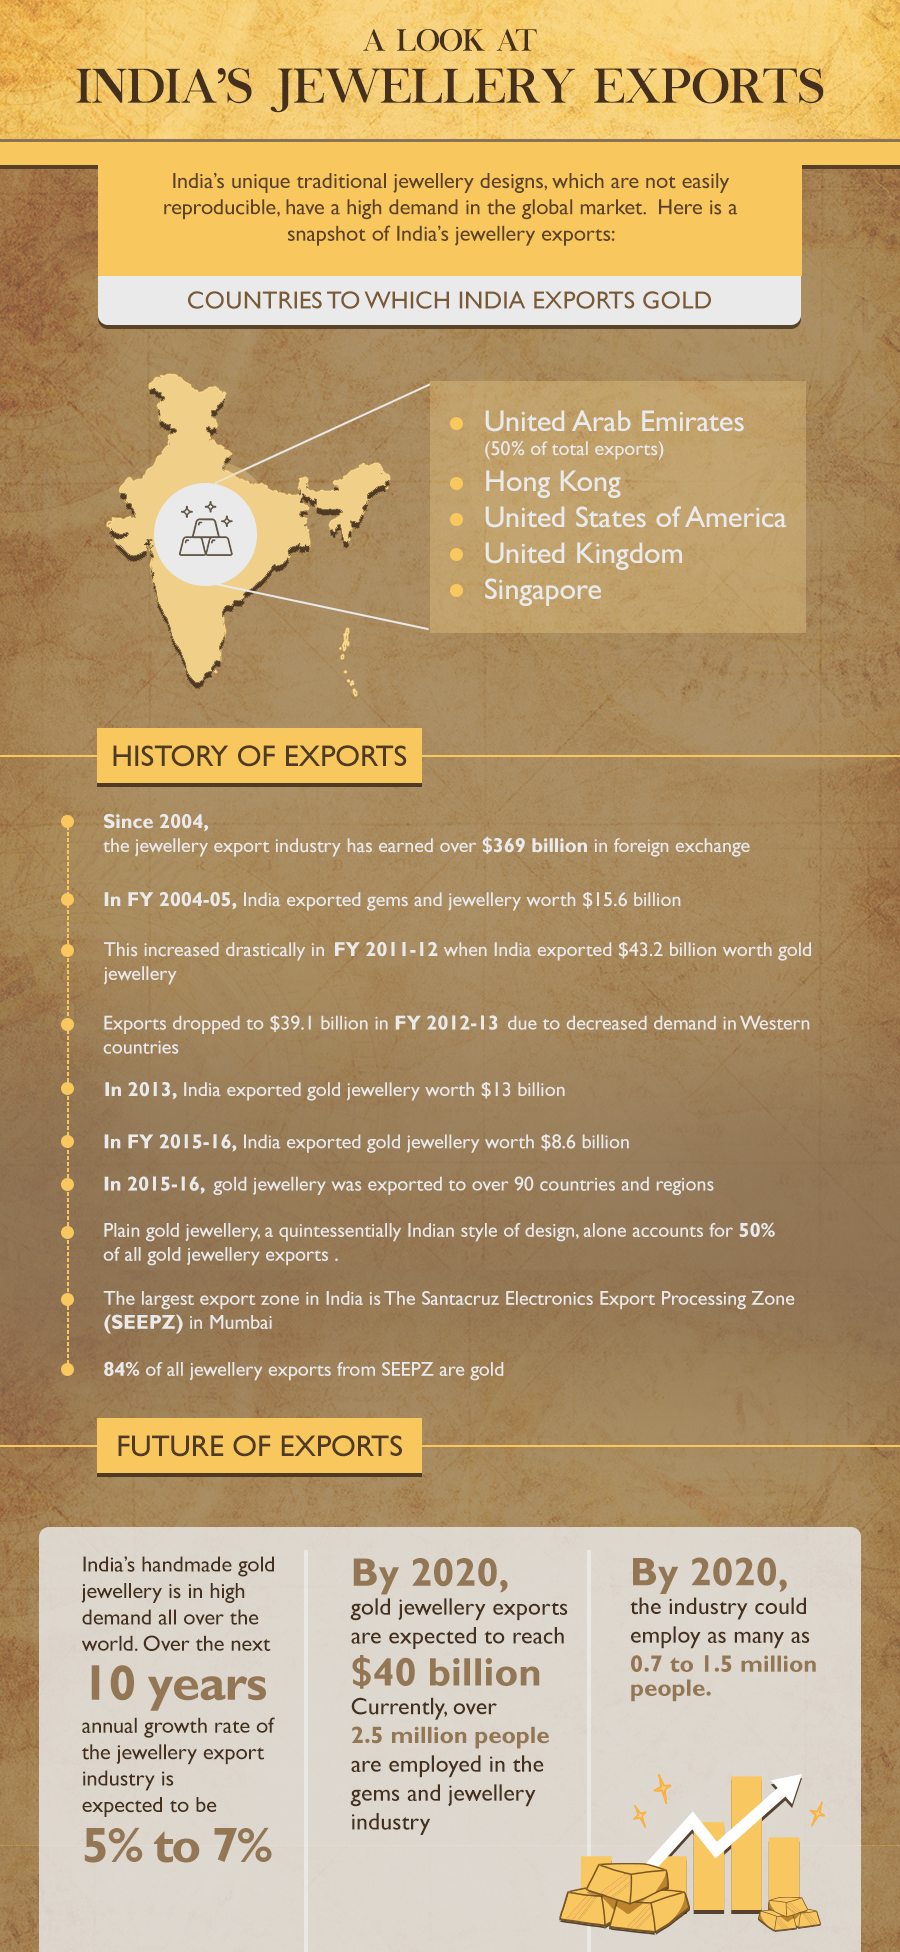 Unique and artistic gold jewellery designs from India are always in high demand across the globe. Let's take a look at history and present of India's gold jewellery exports.